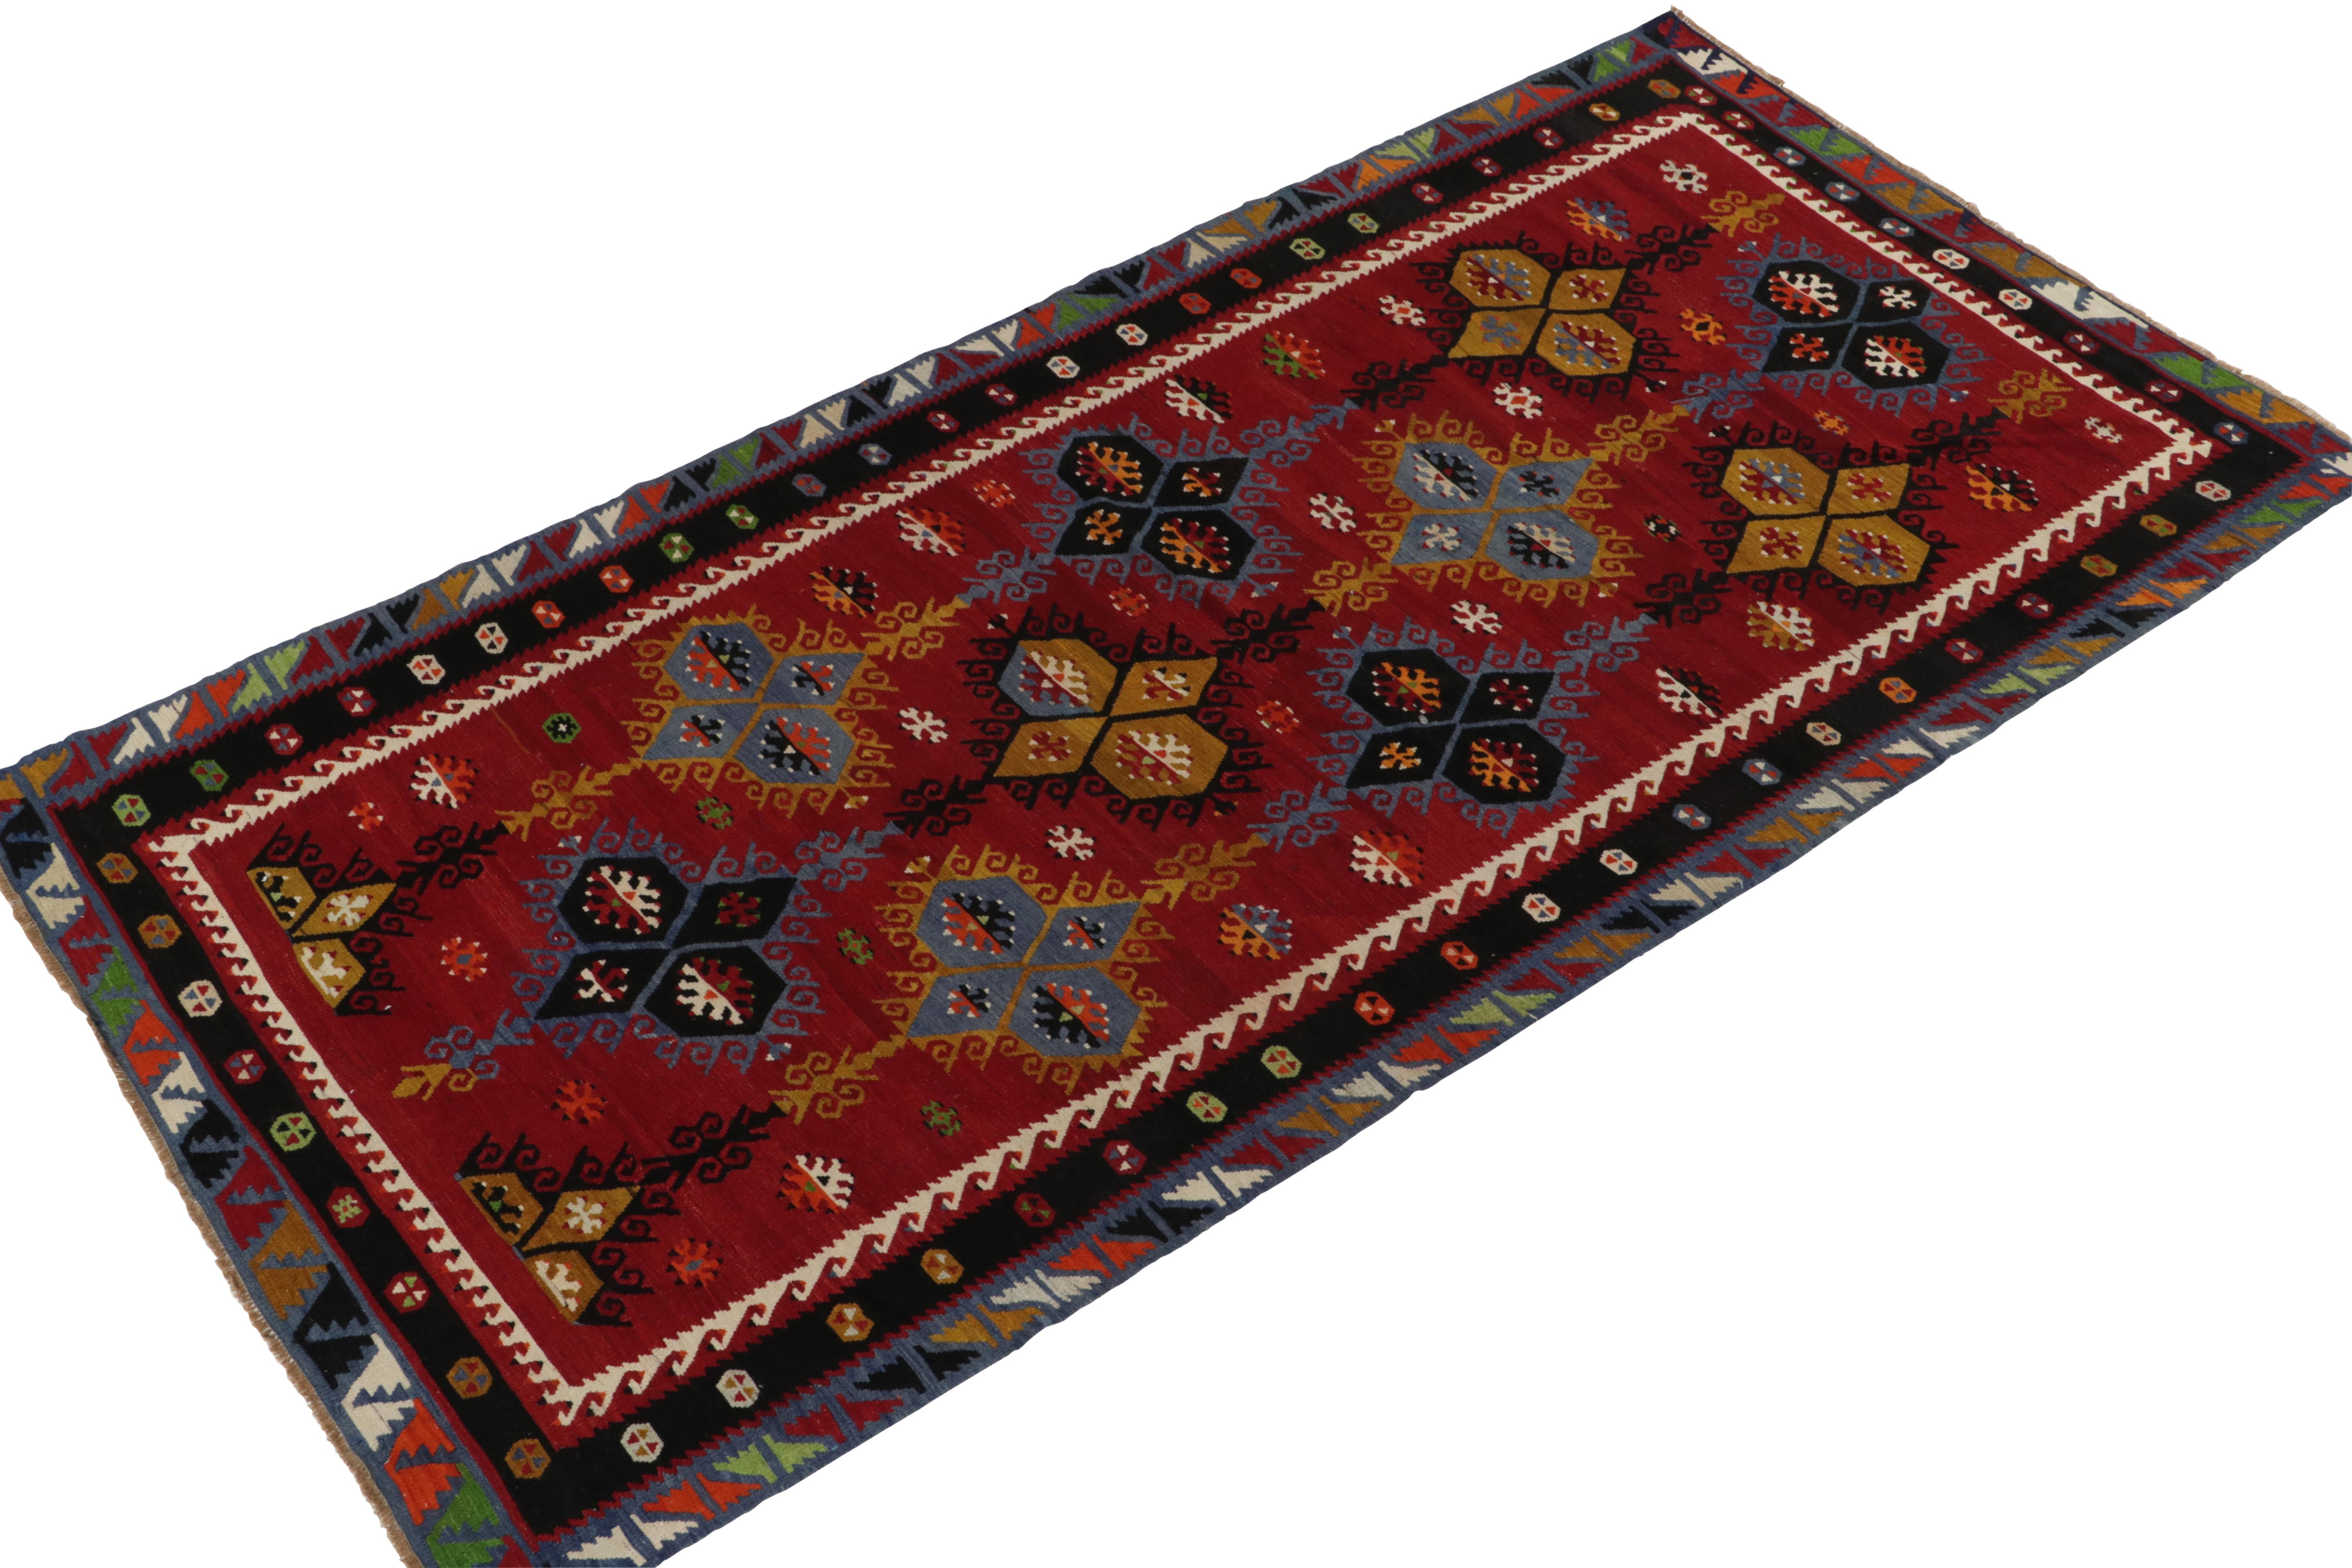 A vintage 6x10 Kilim rug, handwoven in wool originating from Turkey circa 1950-1960. Enjoying a play of tribal motifs and medallions, marrying vividly bright colors against rich red and black for a bold presence underfoot. A uniquely sized piece